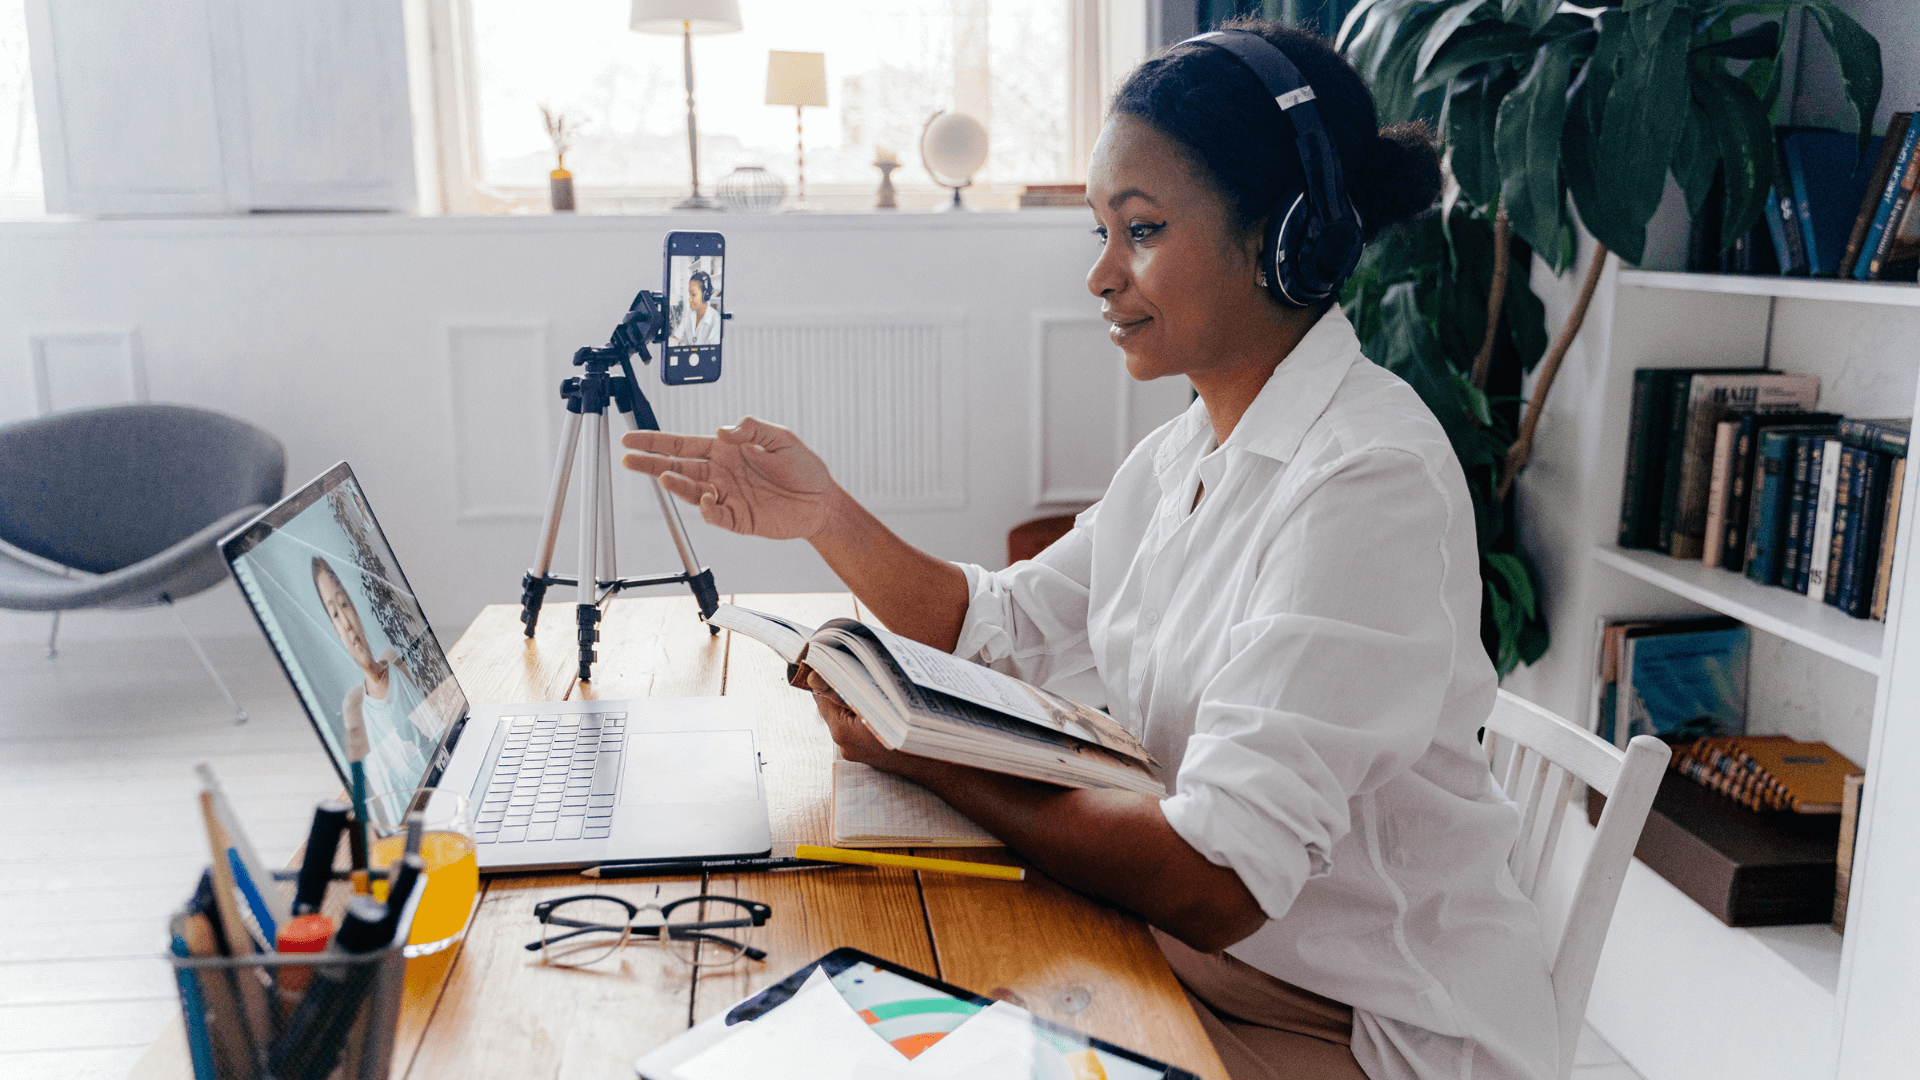 Woman wearing headphones presents in front of a laptop. A cellphone is on a tripod to record her as well.